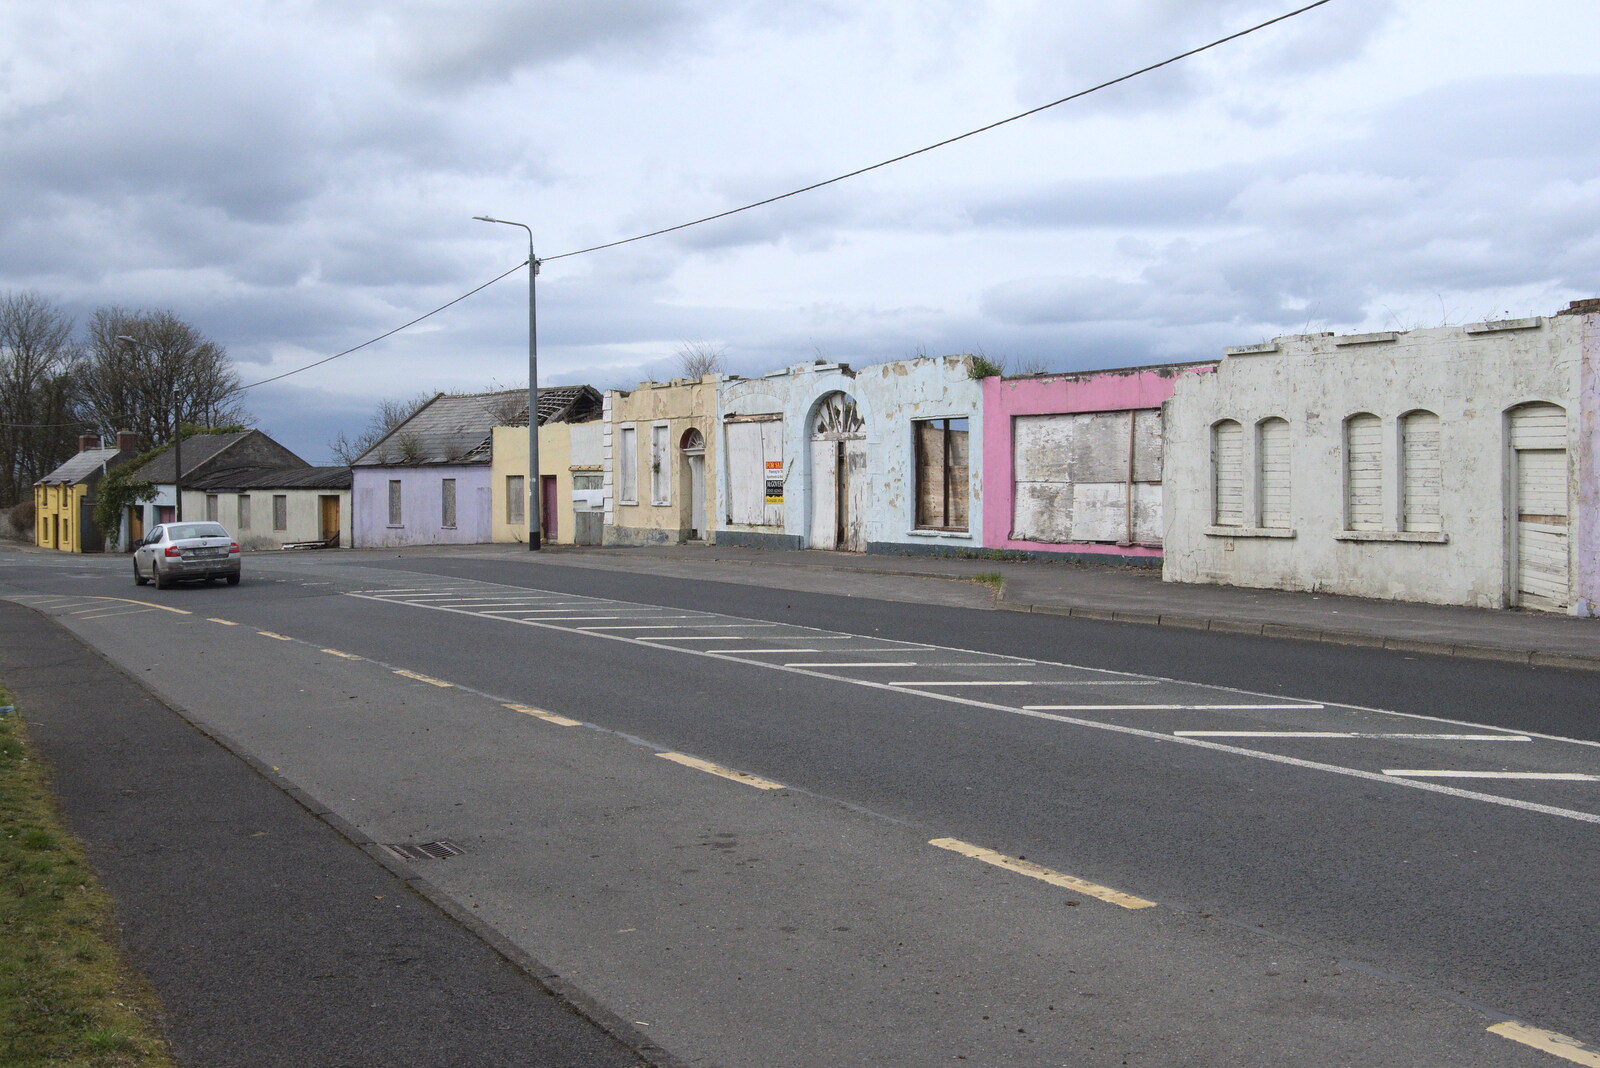 A whole row of derelict buildings in Ballyshannon from Manorhamilton and Bundoran, Leitrim and Donegal, Ireland - 16th April 2022